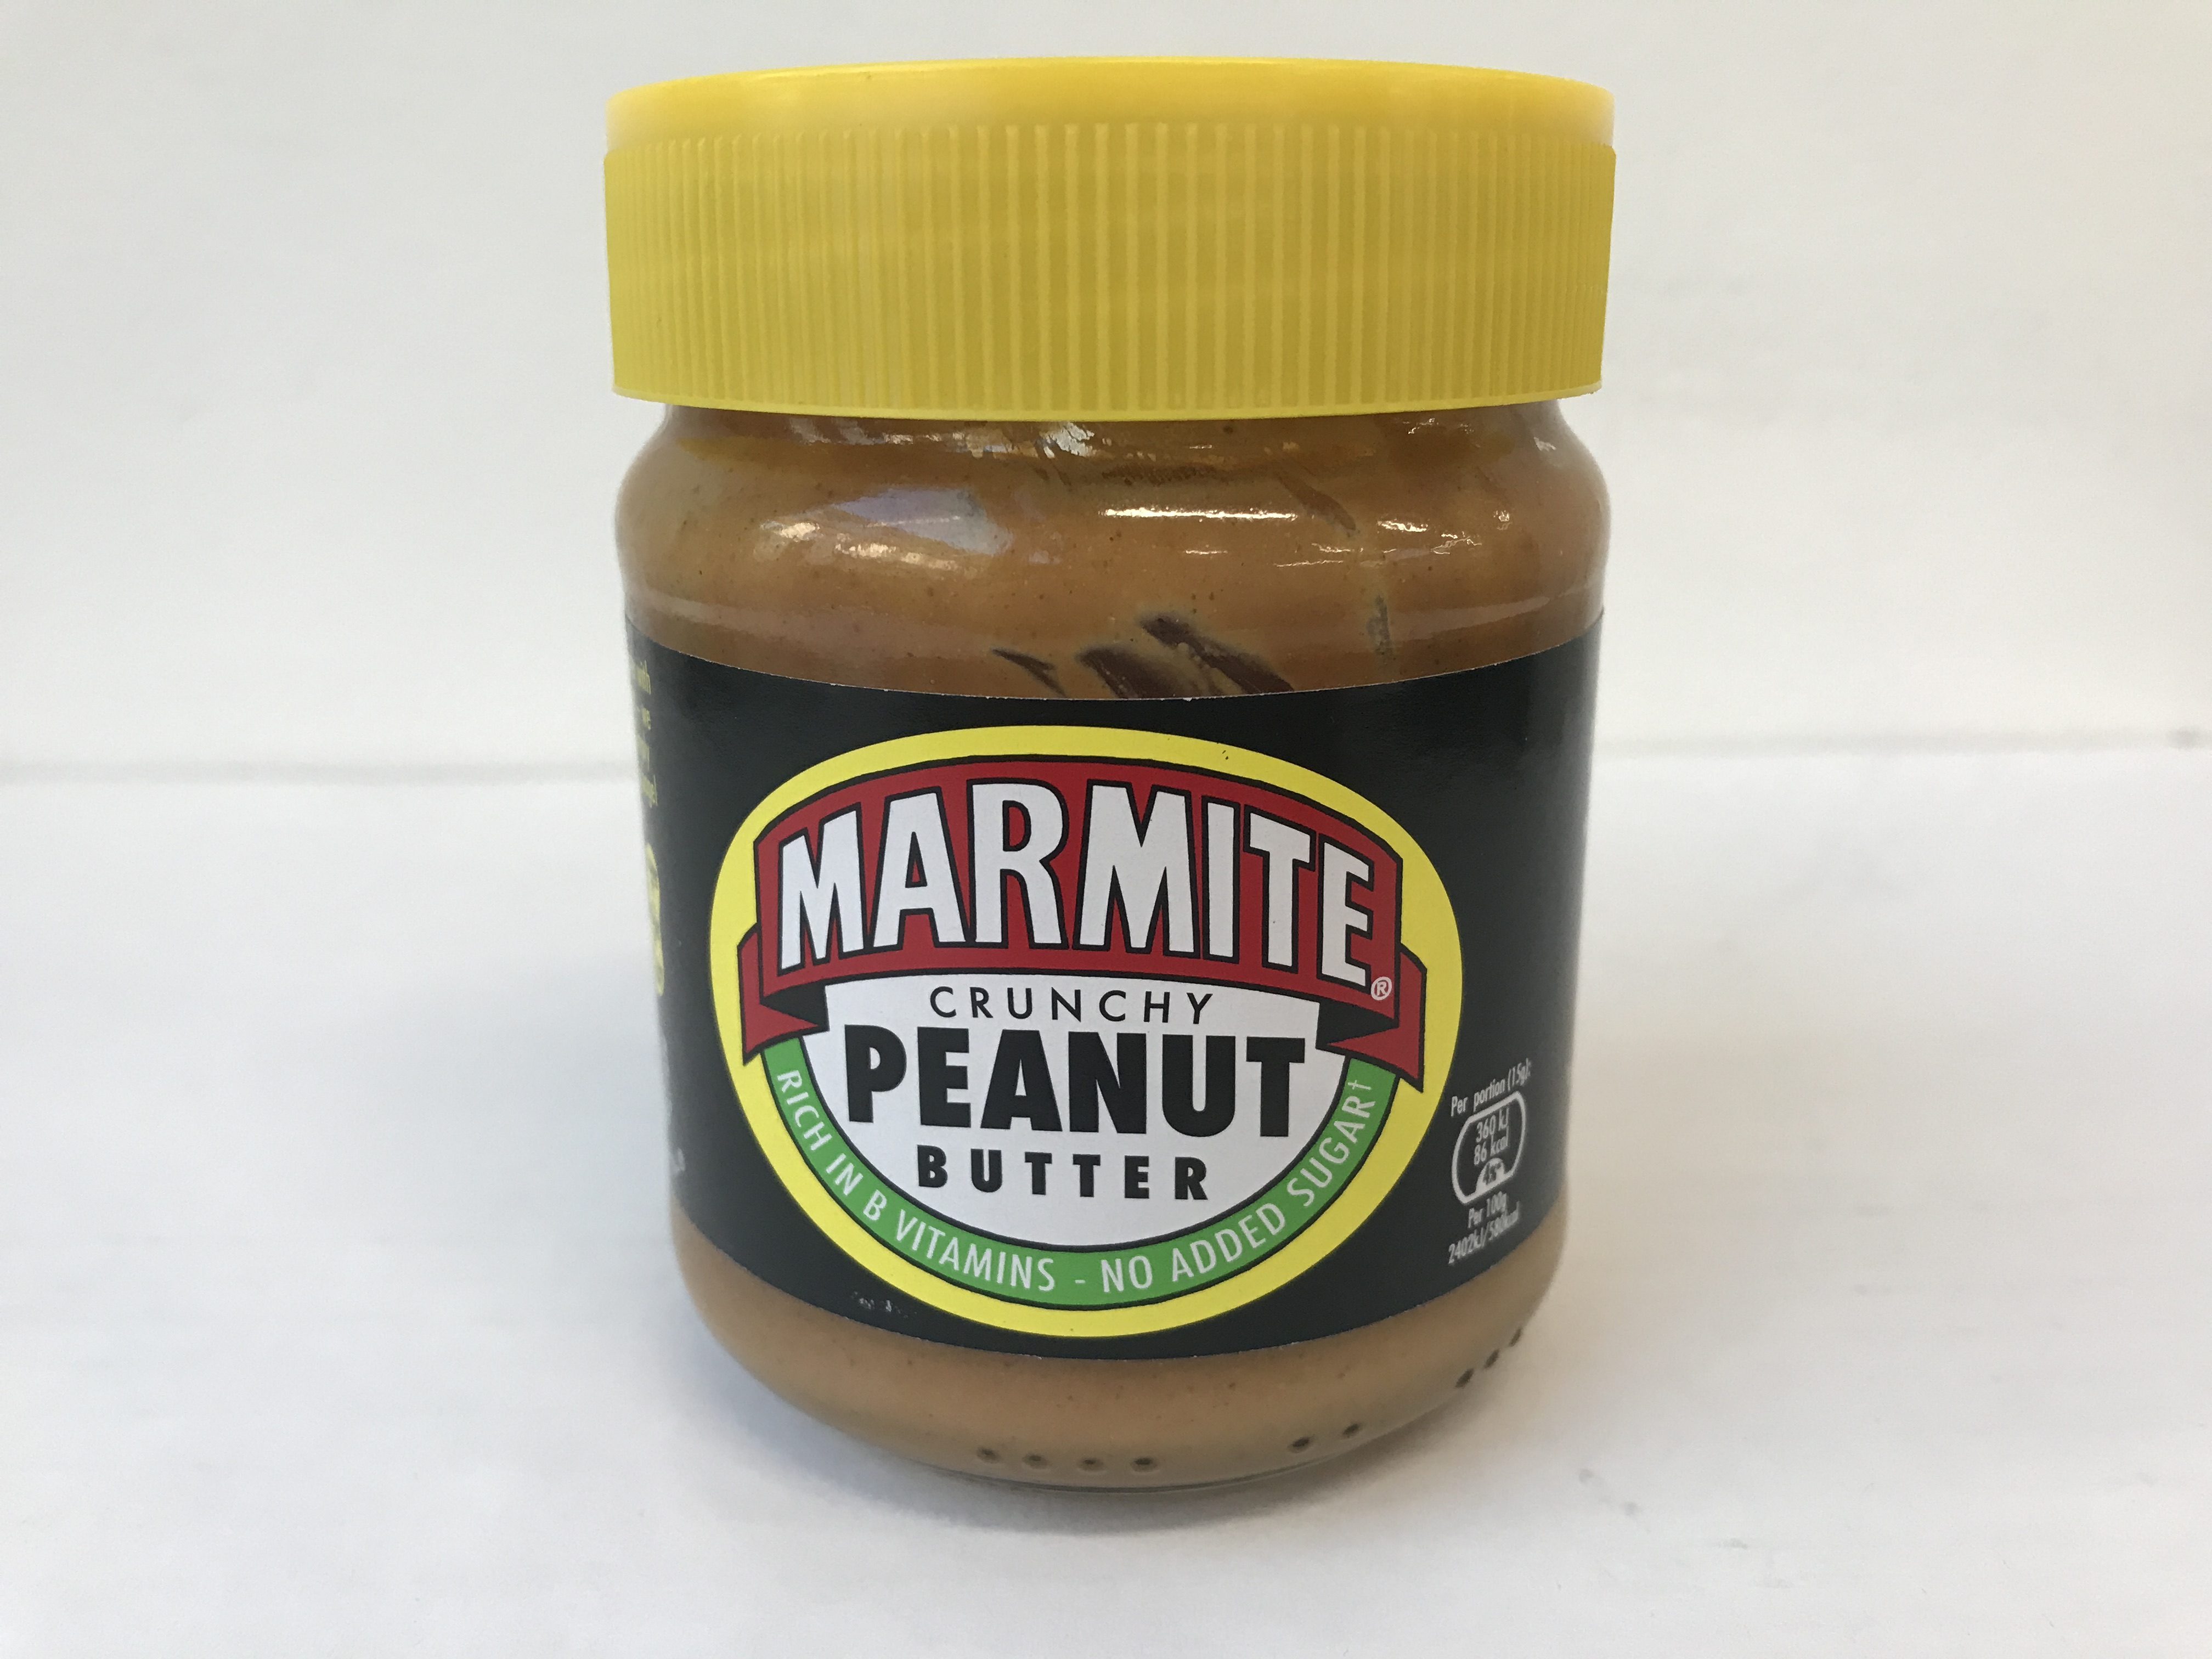 Marmite Peanut Butter is the Epitome of Brexit Britain’s Identity Crisis - MUNCHIES